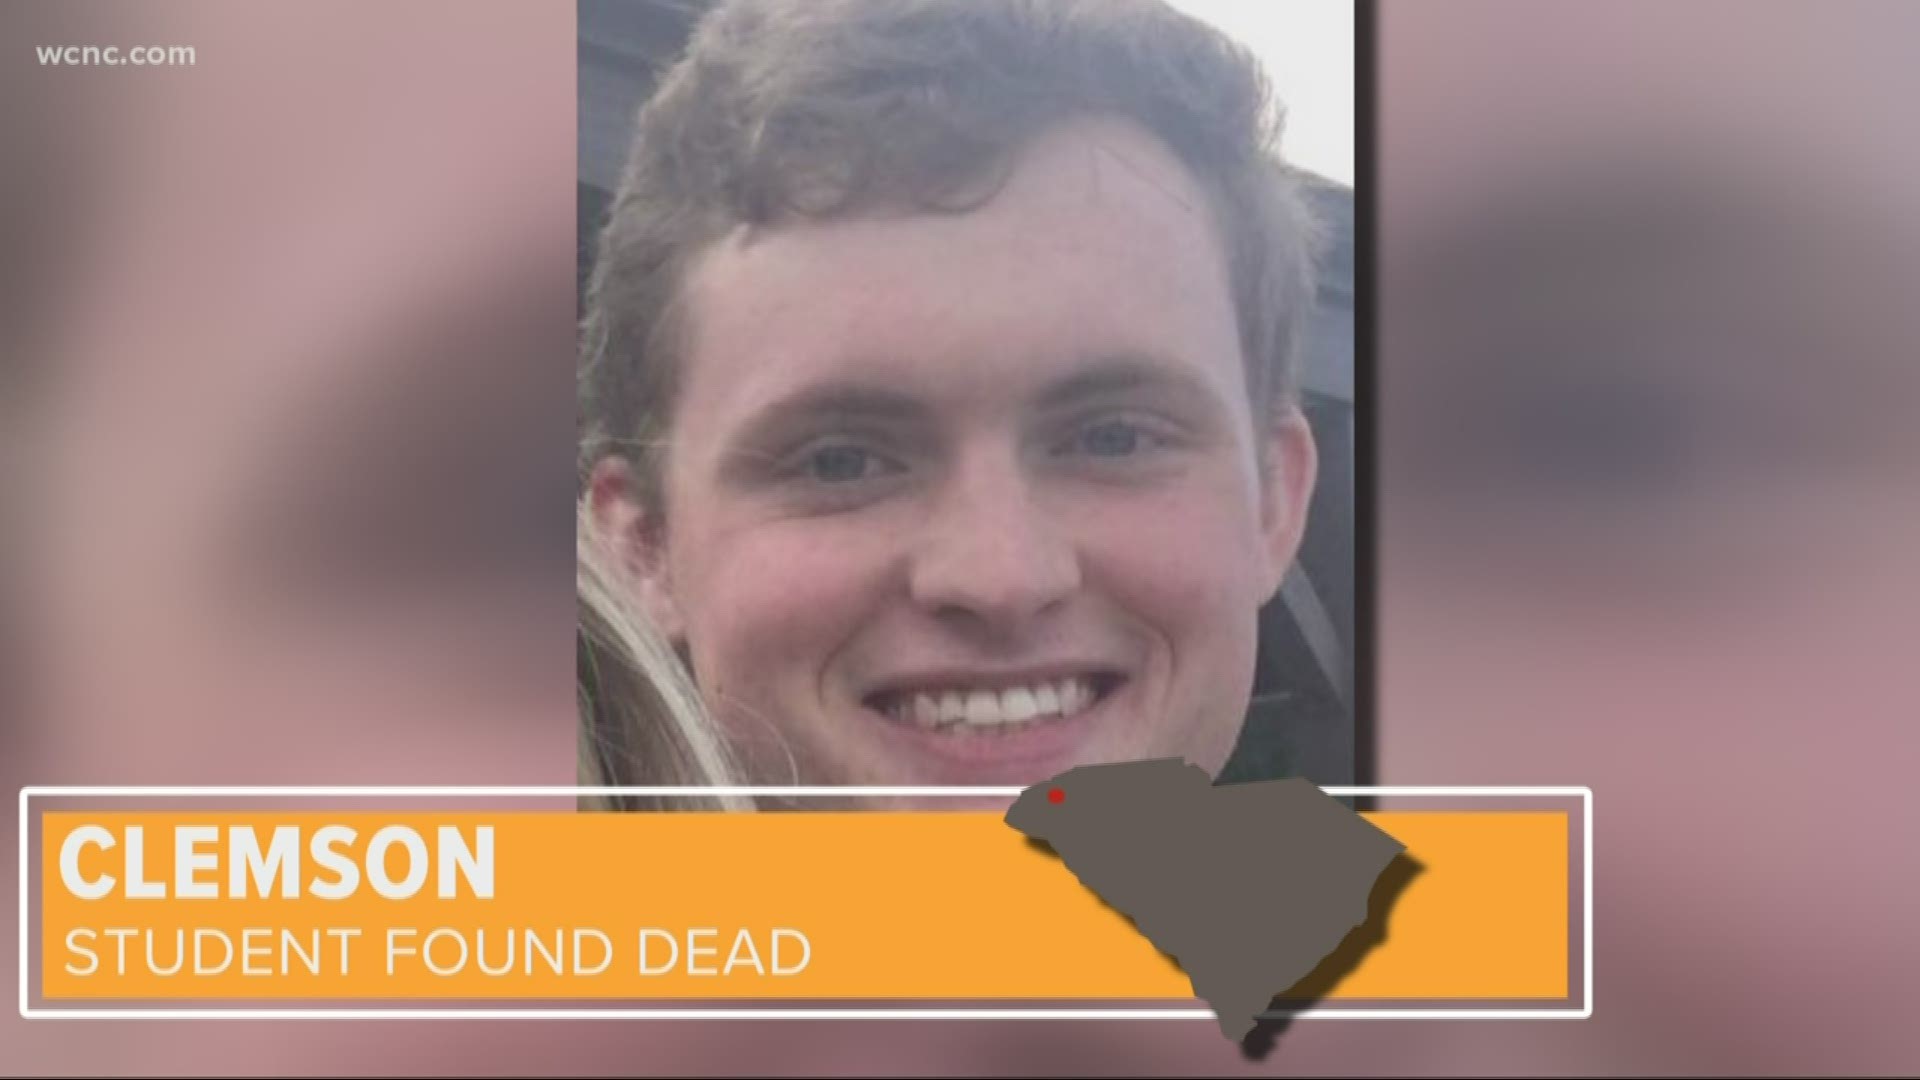 The body of missing Clemson student John Andrew Martin was found in Tennessee four days after he was reported missing.